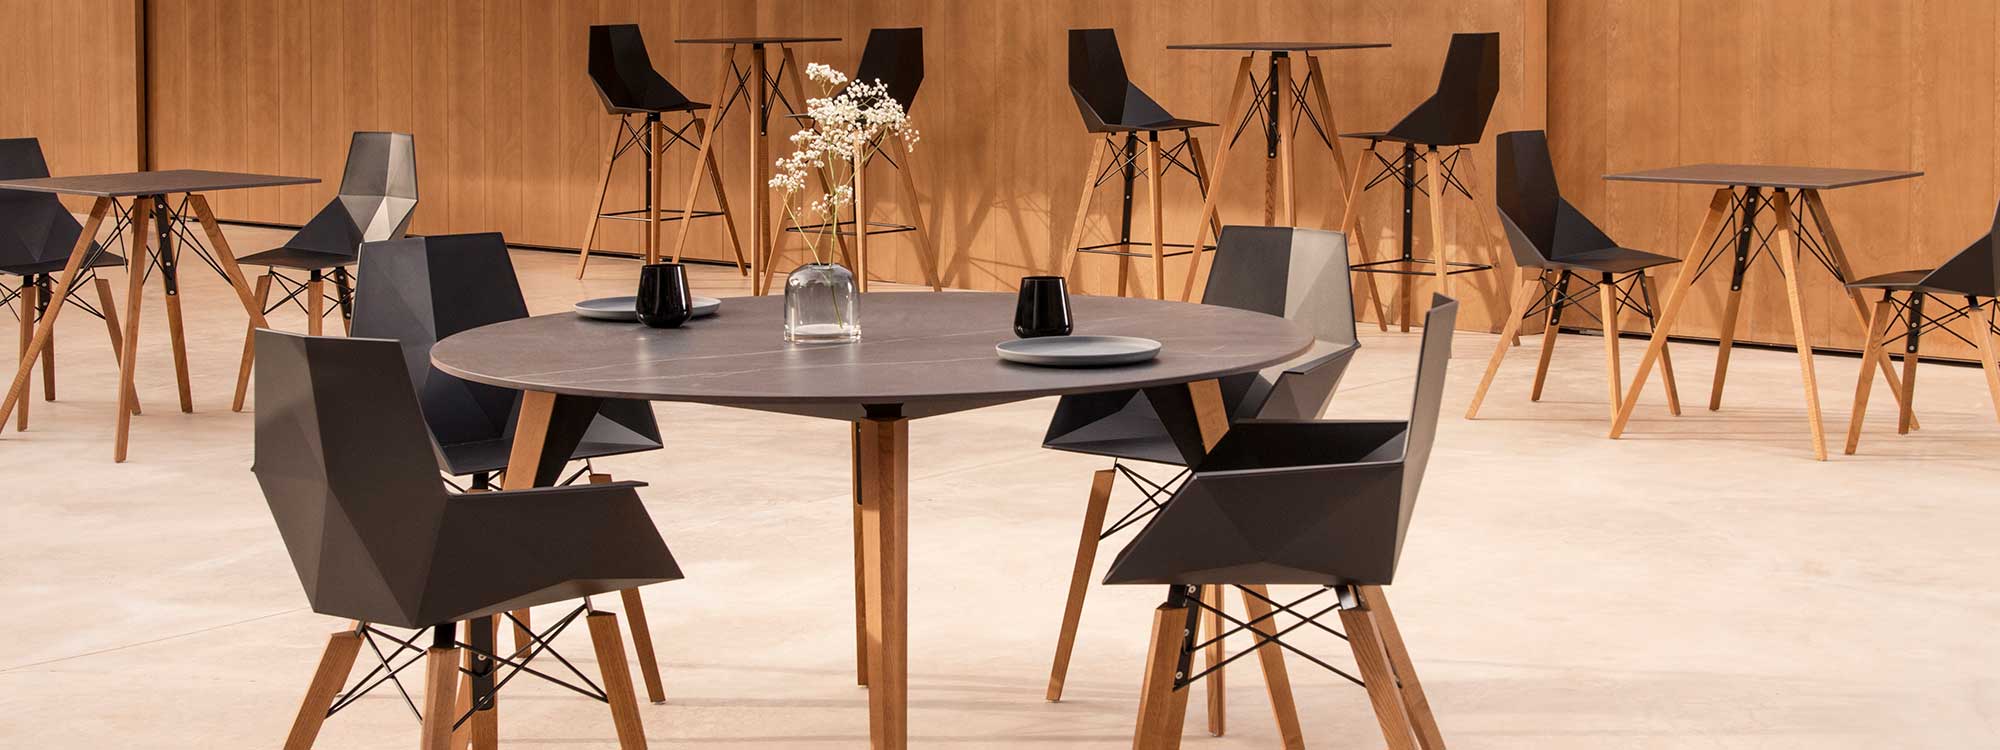 Image of Vondom Faz Wood modern bar tables and chairs, with Faz Wood contract dining furniture in the foreground